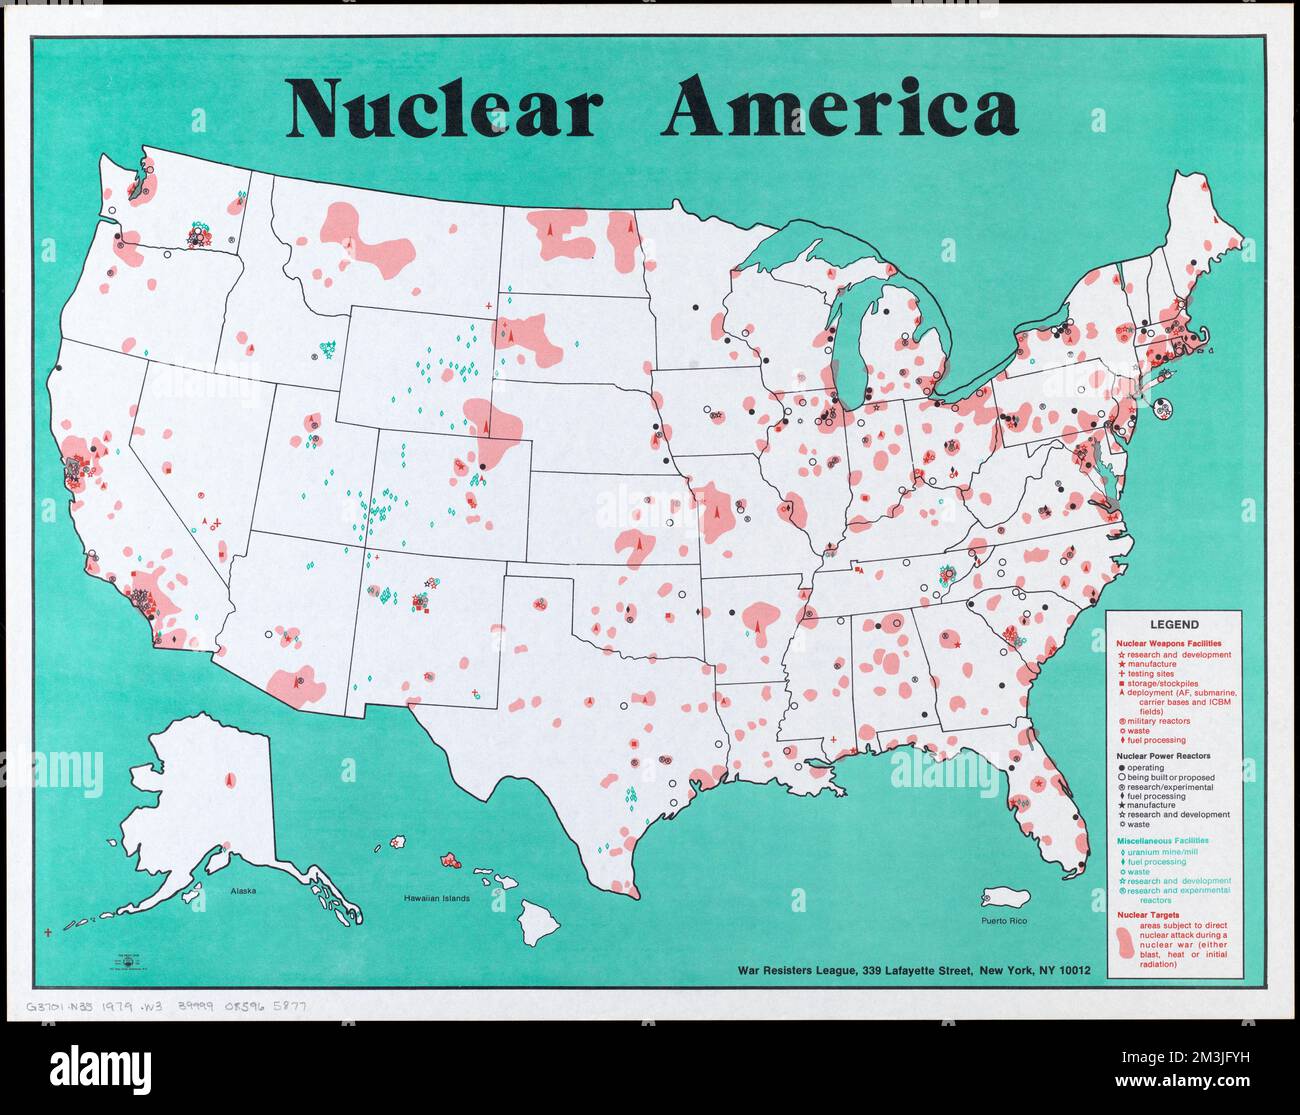 Nuclear America , Vereinigte Staaten, Maps, Nuclear Facilities, Vereinigte Staaten, Karten, radioaktiver Fallout, USA, Karten Norman B. Leventhal Map Center Collection Stockfoto